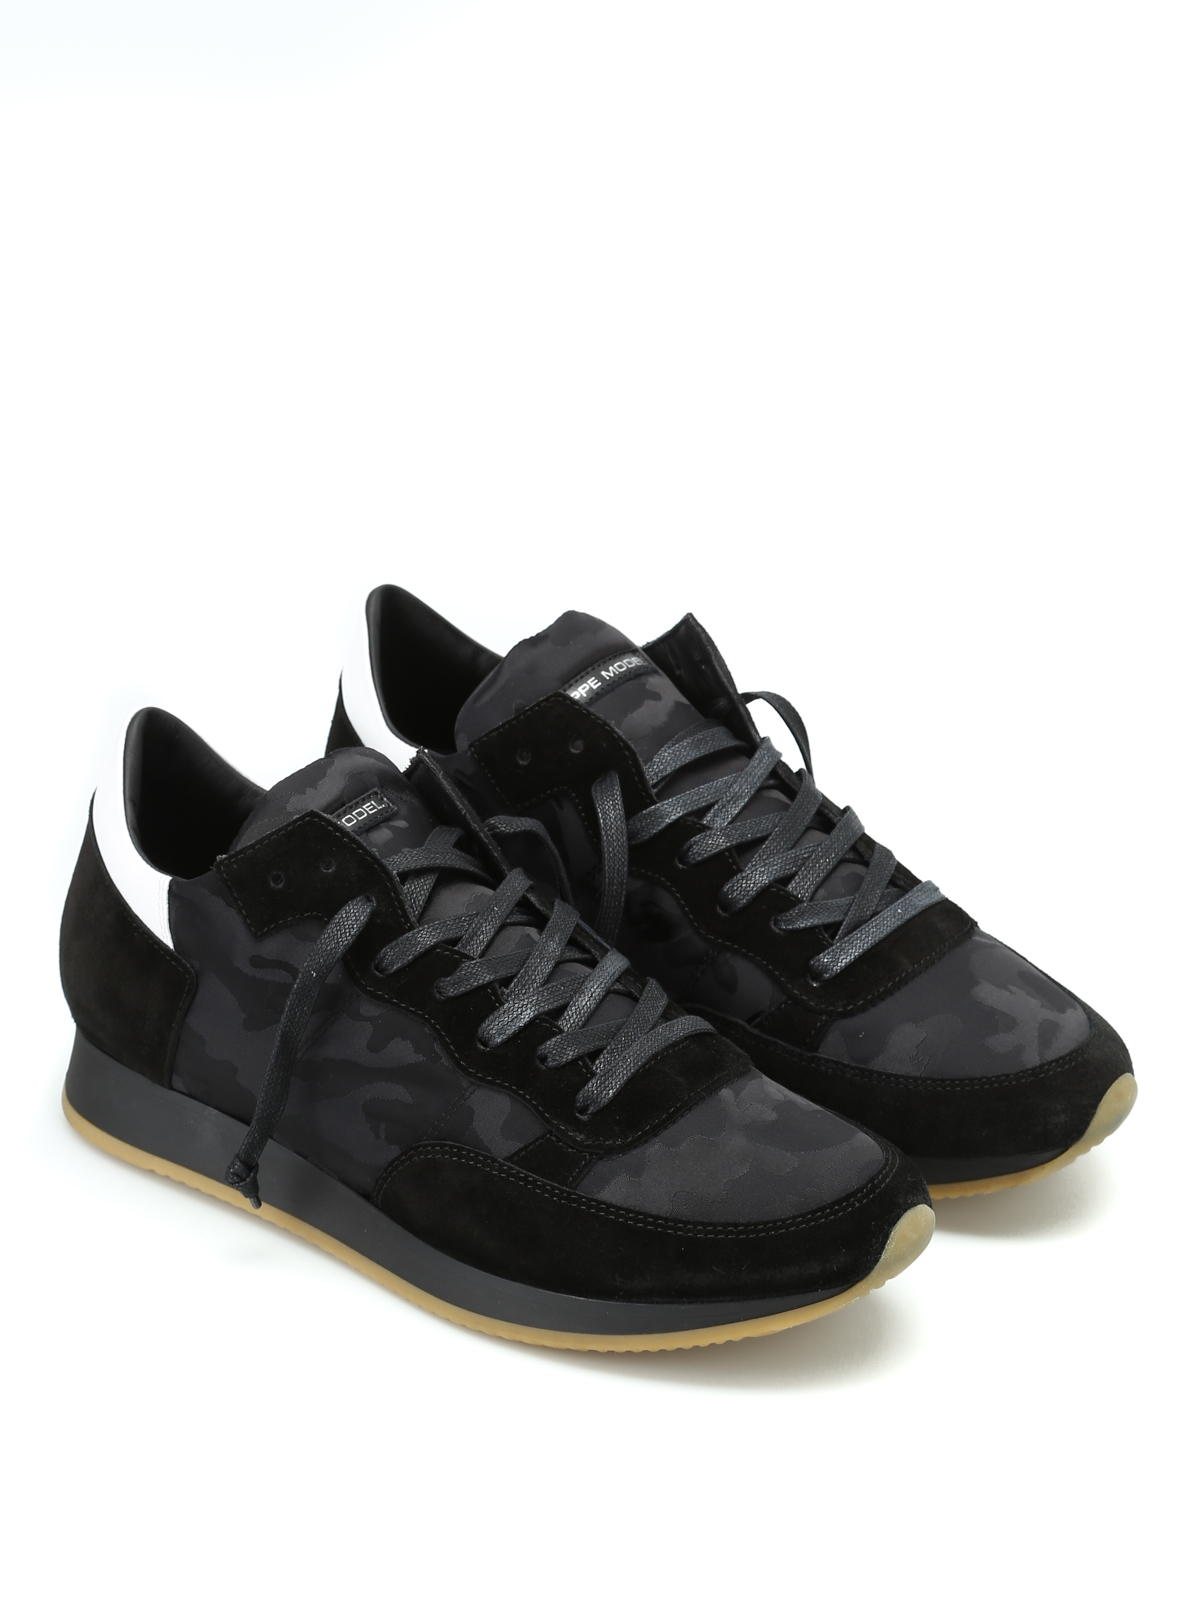 Trainers Philippe Model - Tropez black camu sneakers - TRLUCF21